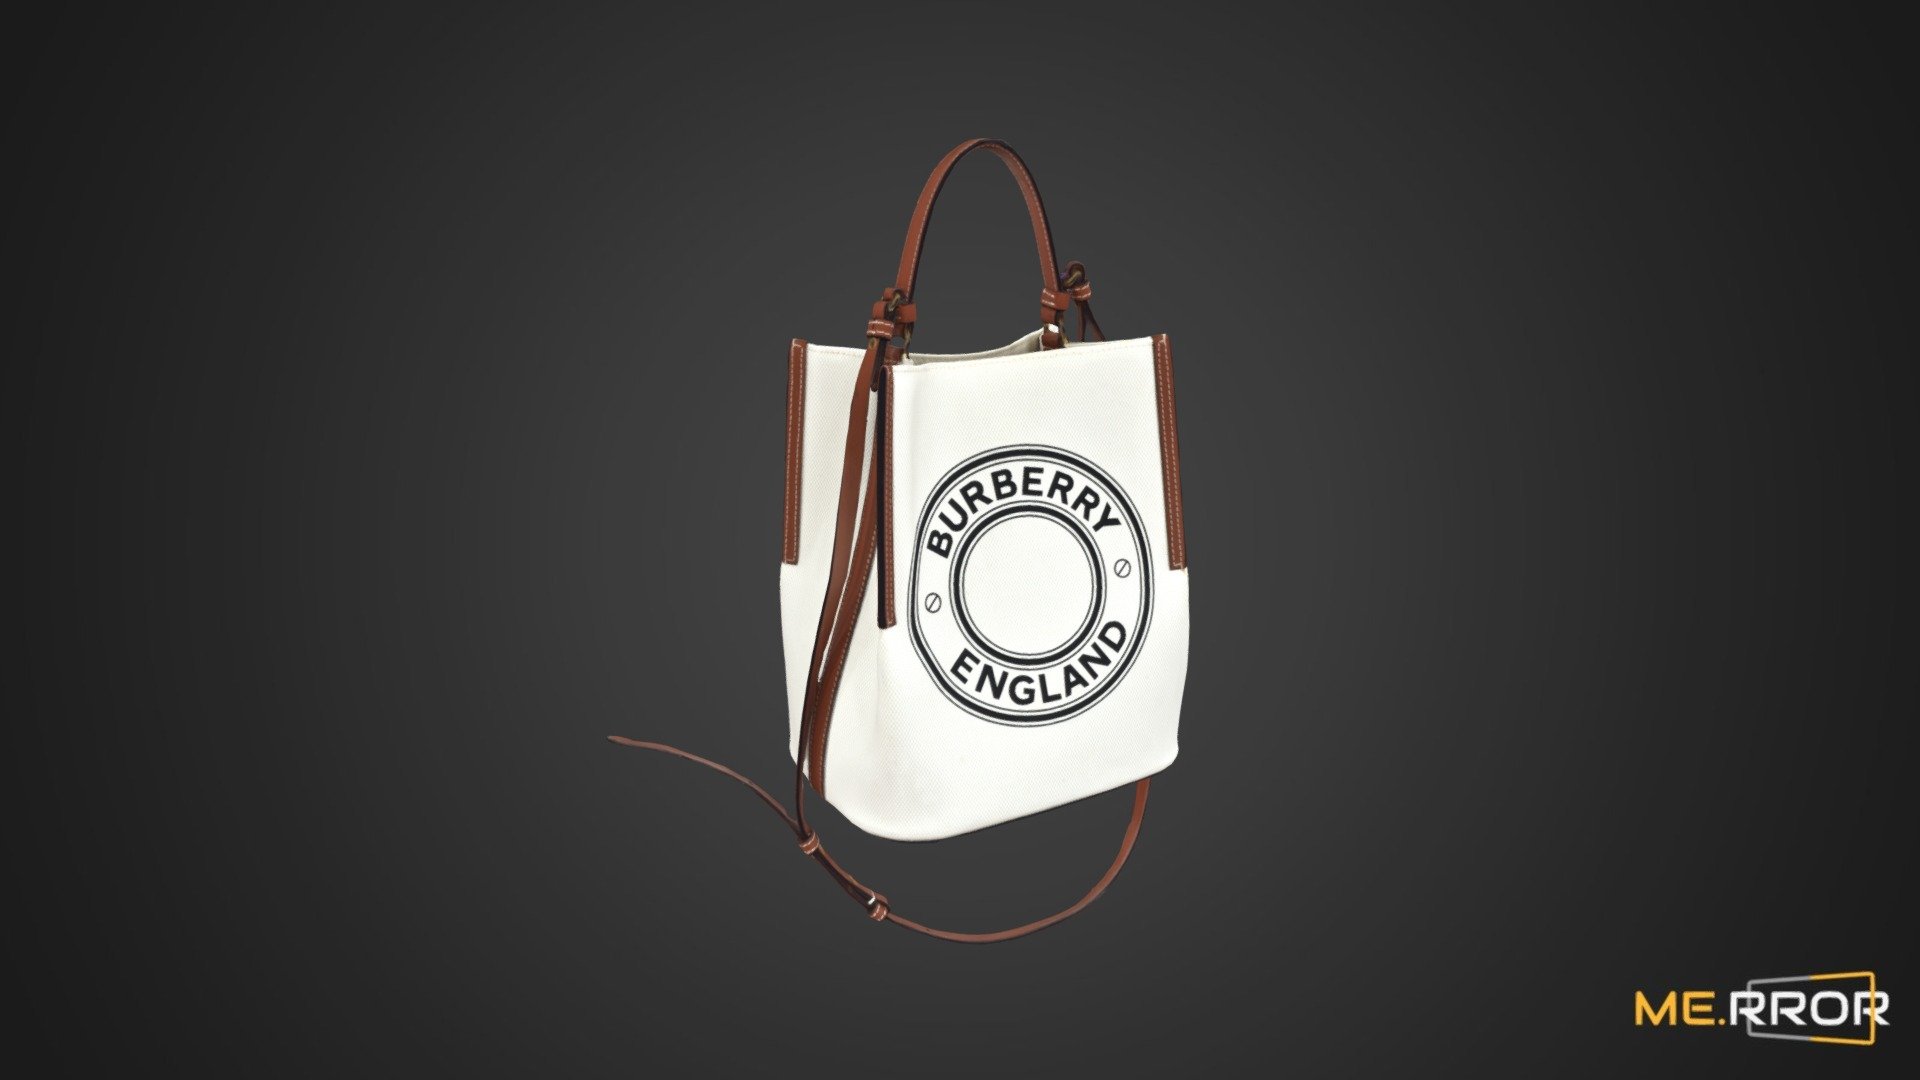 MERROR is a 3D Content PLATFORM which introduces various Asian assets to the 3D world


3DScanning #Photogrametry #ME.RROR - Burberry Bucket bag - Buy Royalty Free 3D model by ME.RROR (@merror) 3d model